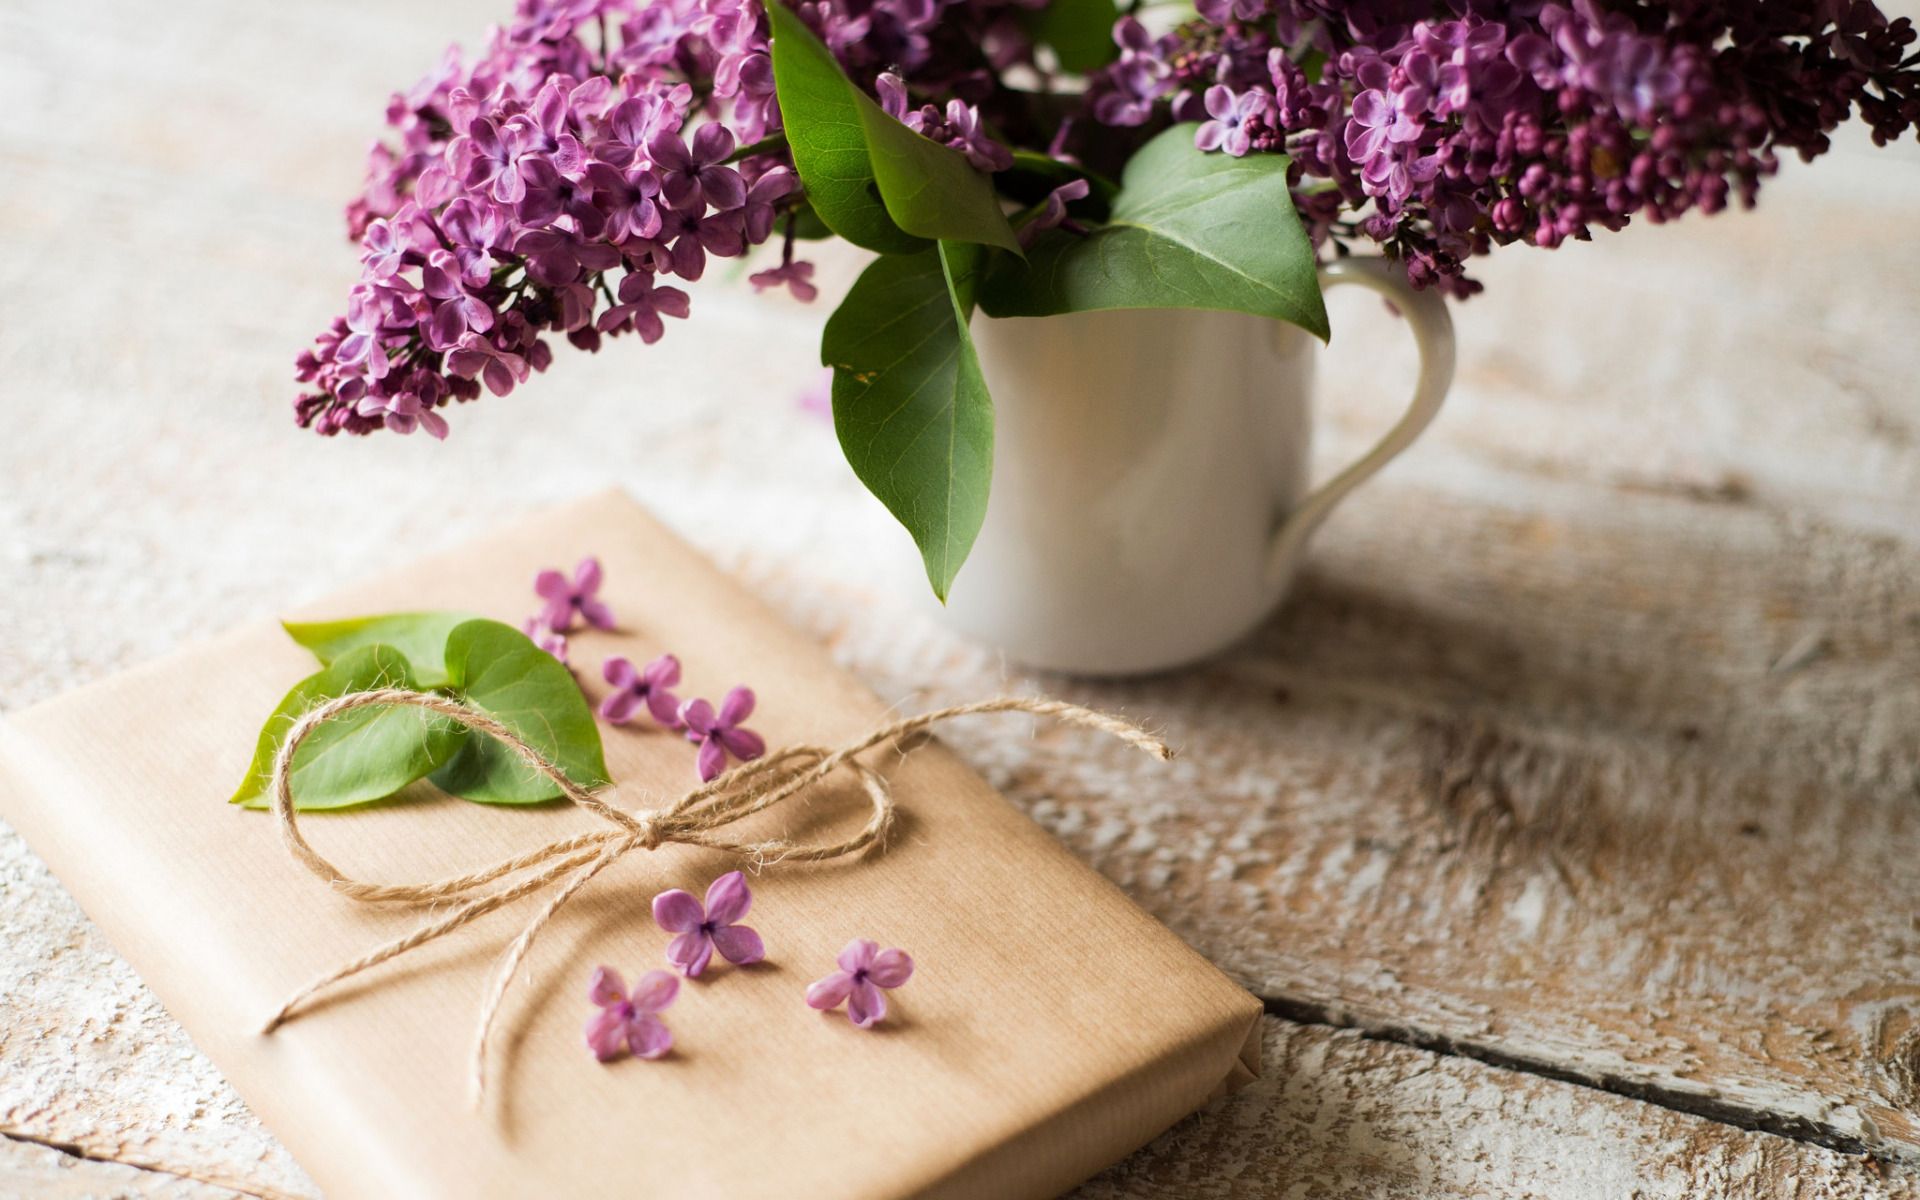 Download wallpaper Lilac, mood concepts, bouquet of lilacs, book on the table, spring, purple spring flowers for desktop with resolution 1920x1200. High Quality HD picture wallpaper